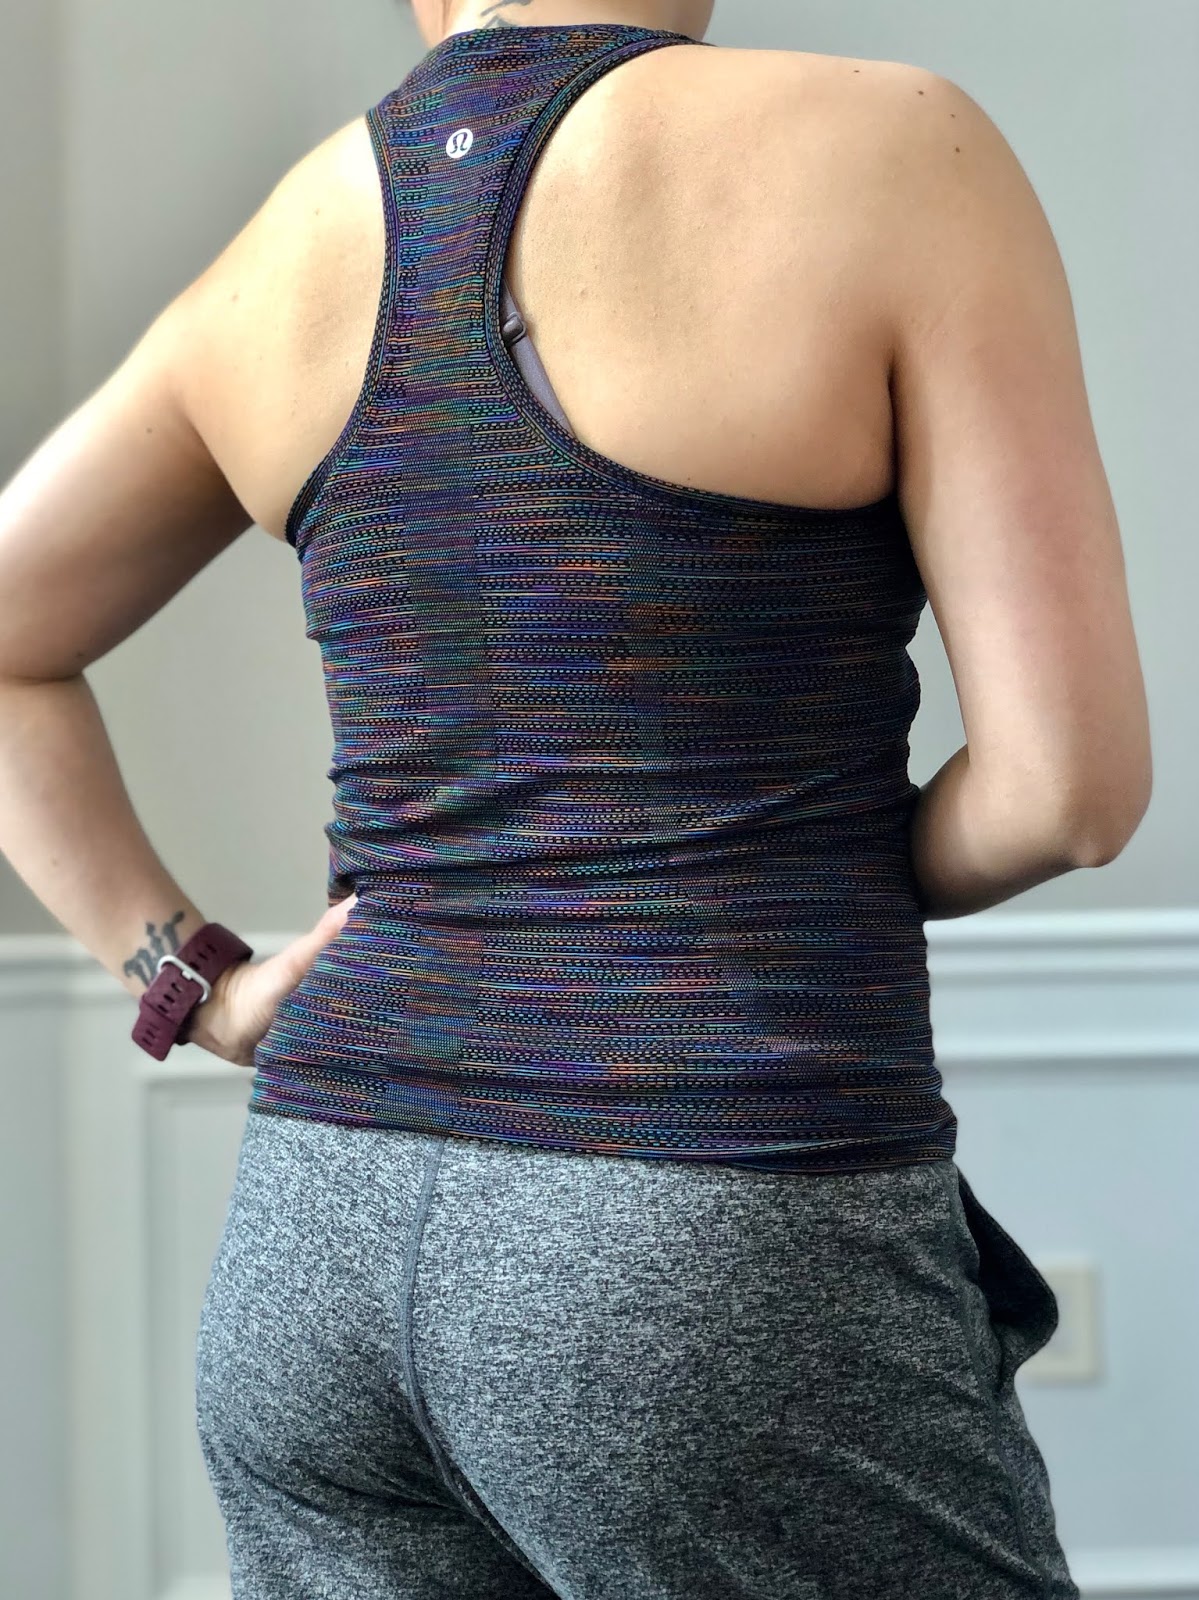 Fit Review Friday! Swiftly Love Edition Racerback and Short Sleeve